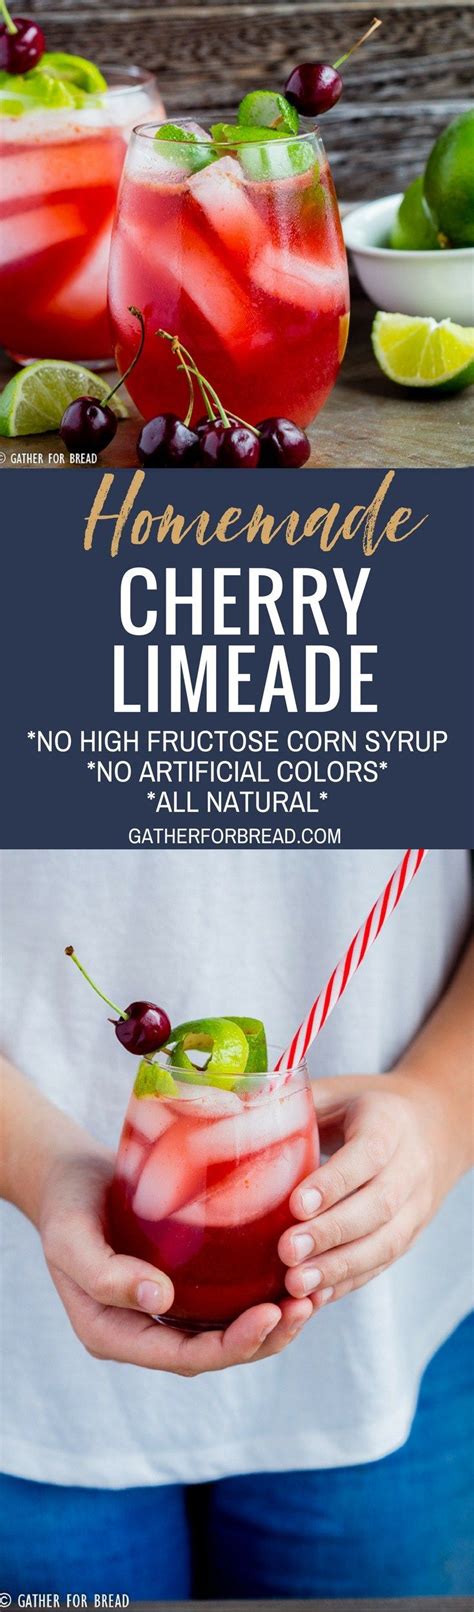 Homemade Cherry Limeade How To Make Cherry Limeade At Home With Real